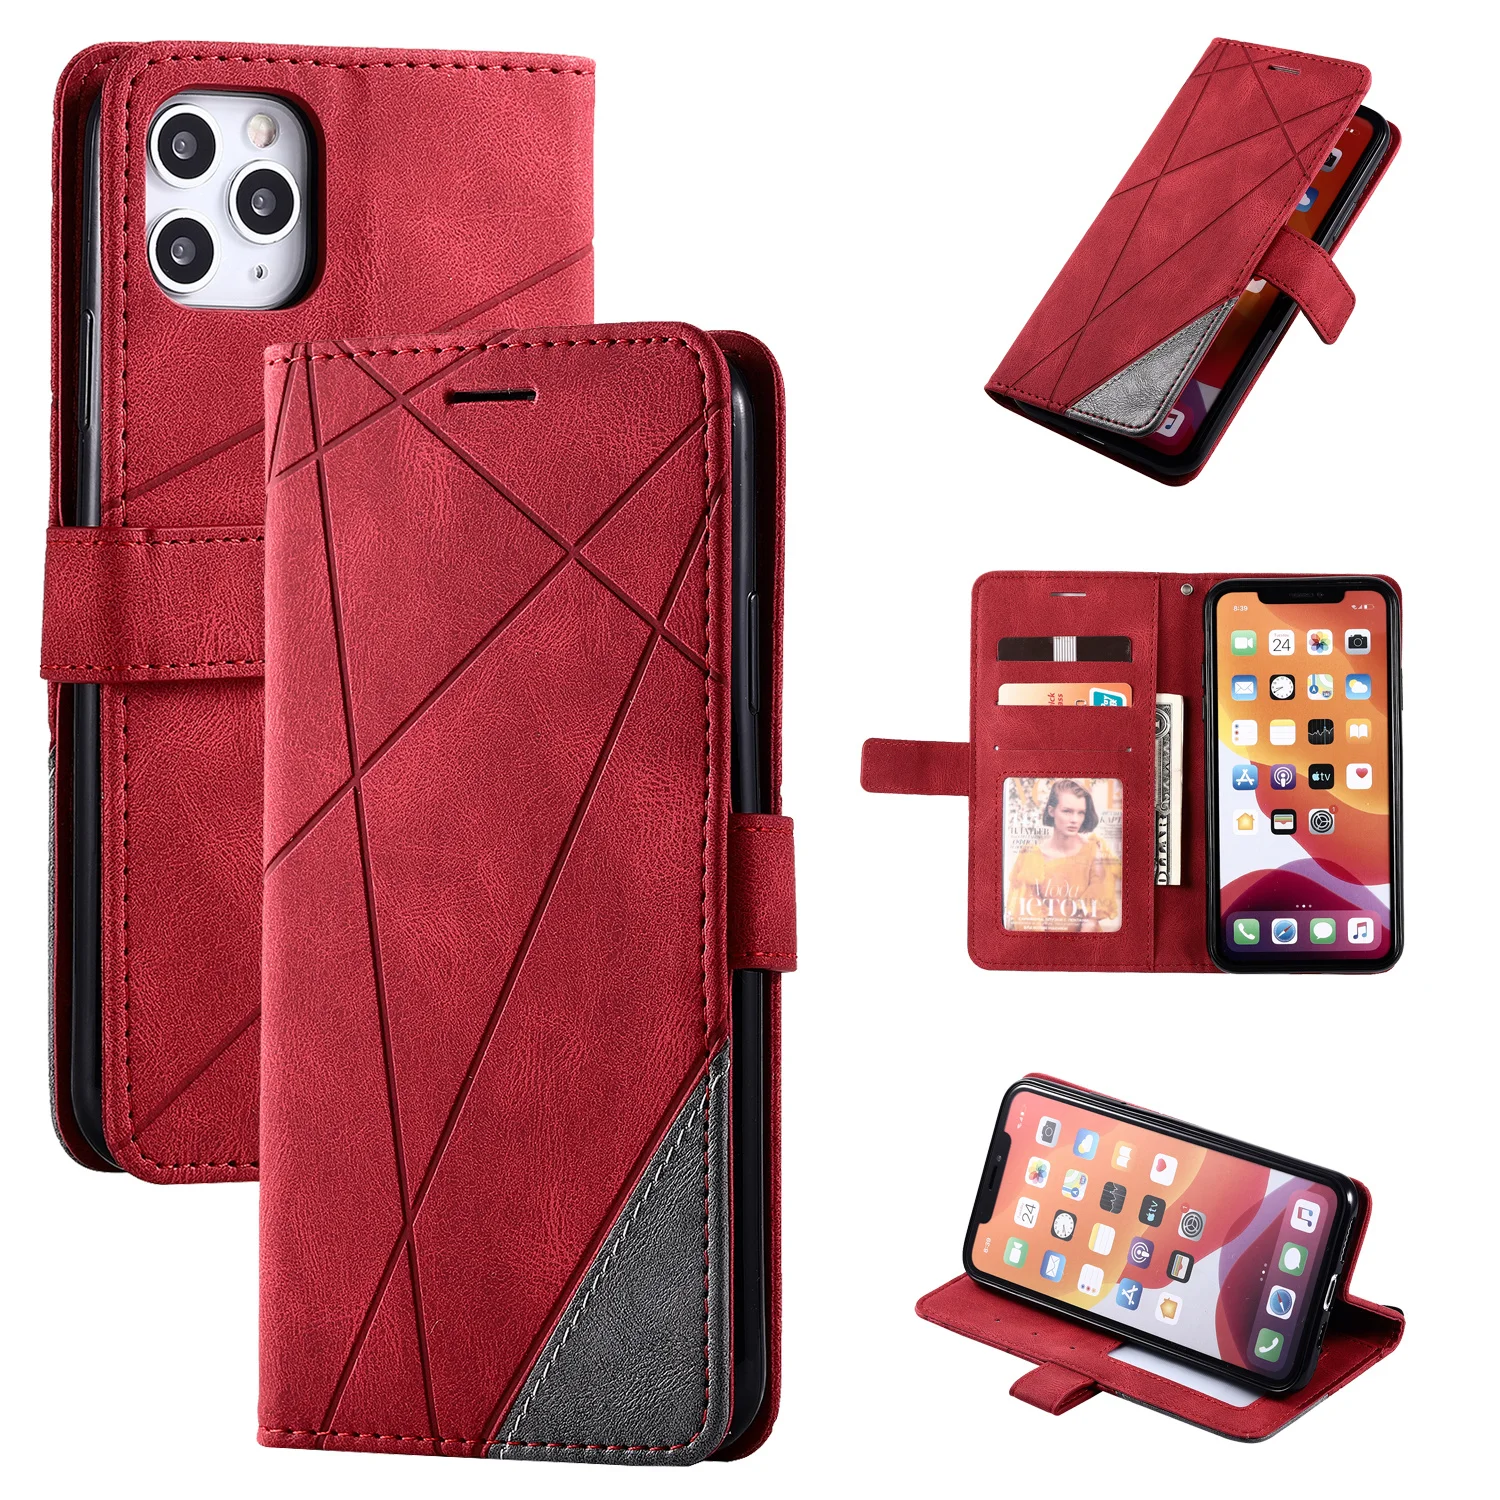 

Stand Business Phone Holster For Etui Xiaomi 11 Poco X3 Nfc M3 Redmi Note 10 Pro 7 7A 8 8A 8T 9 Stripe Wallet Rhombus Case D21G